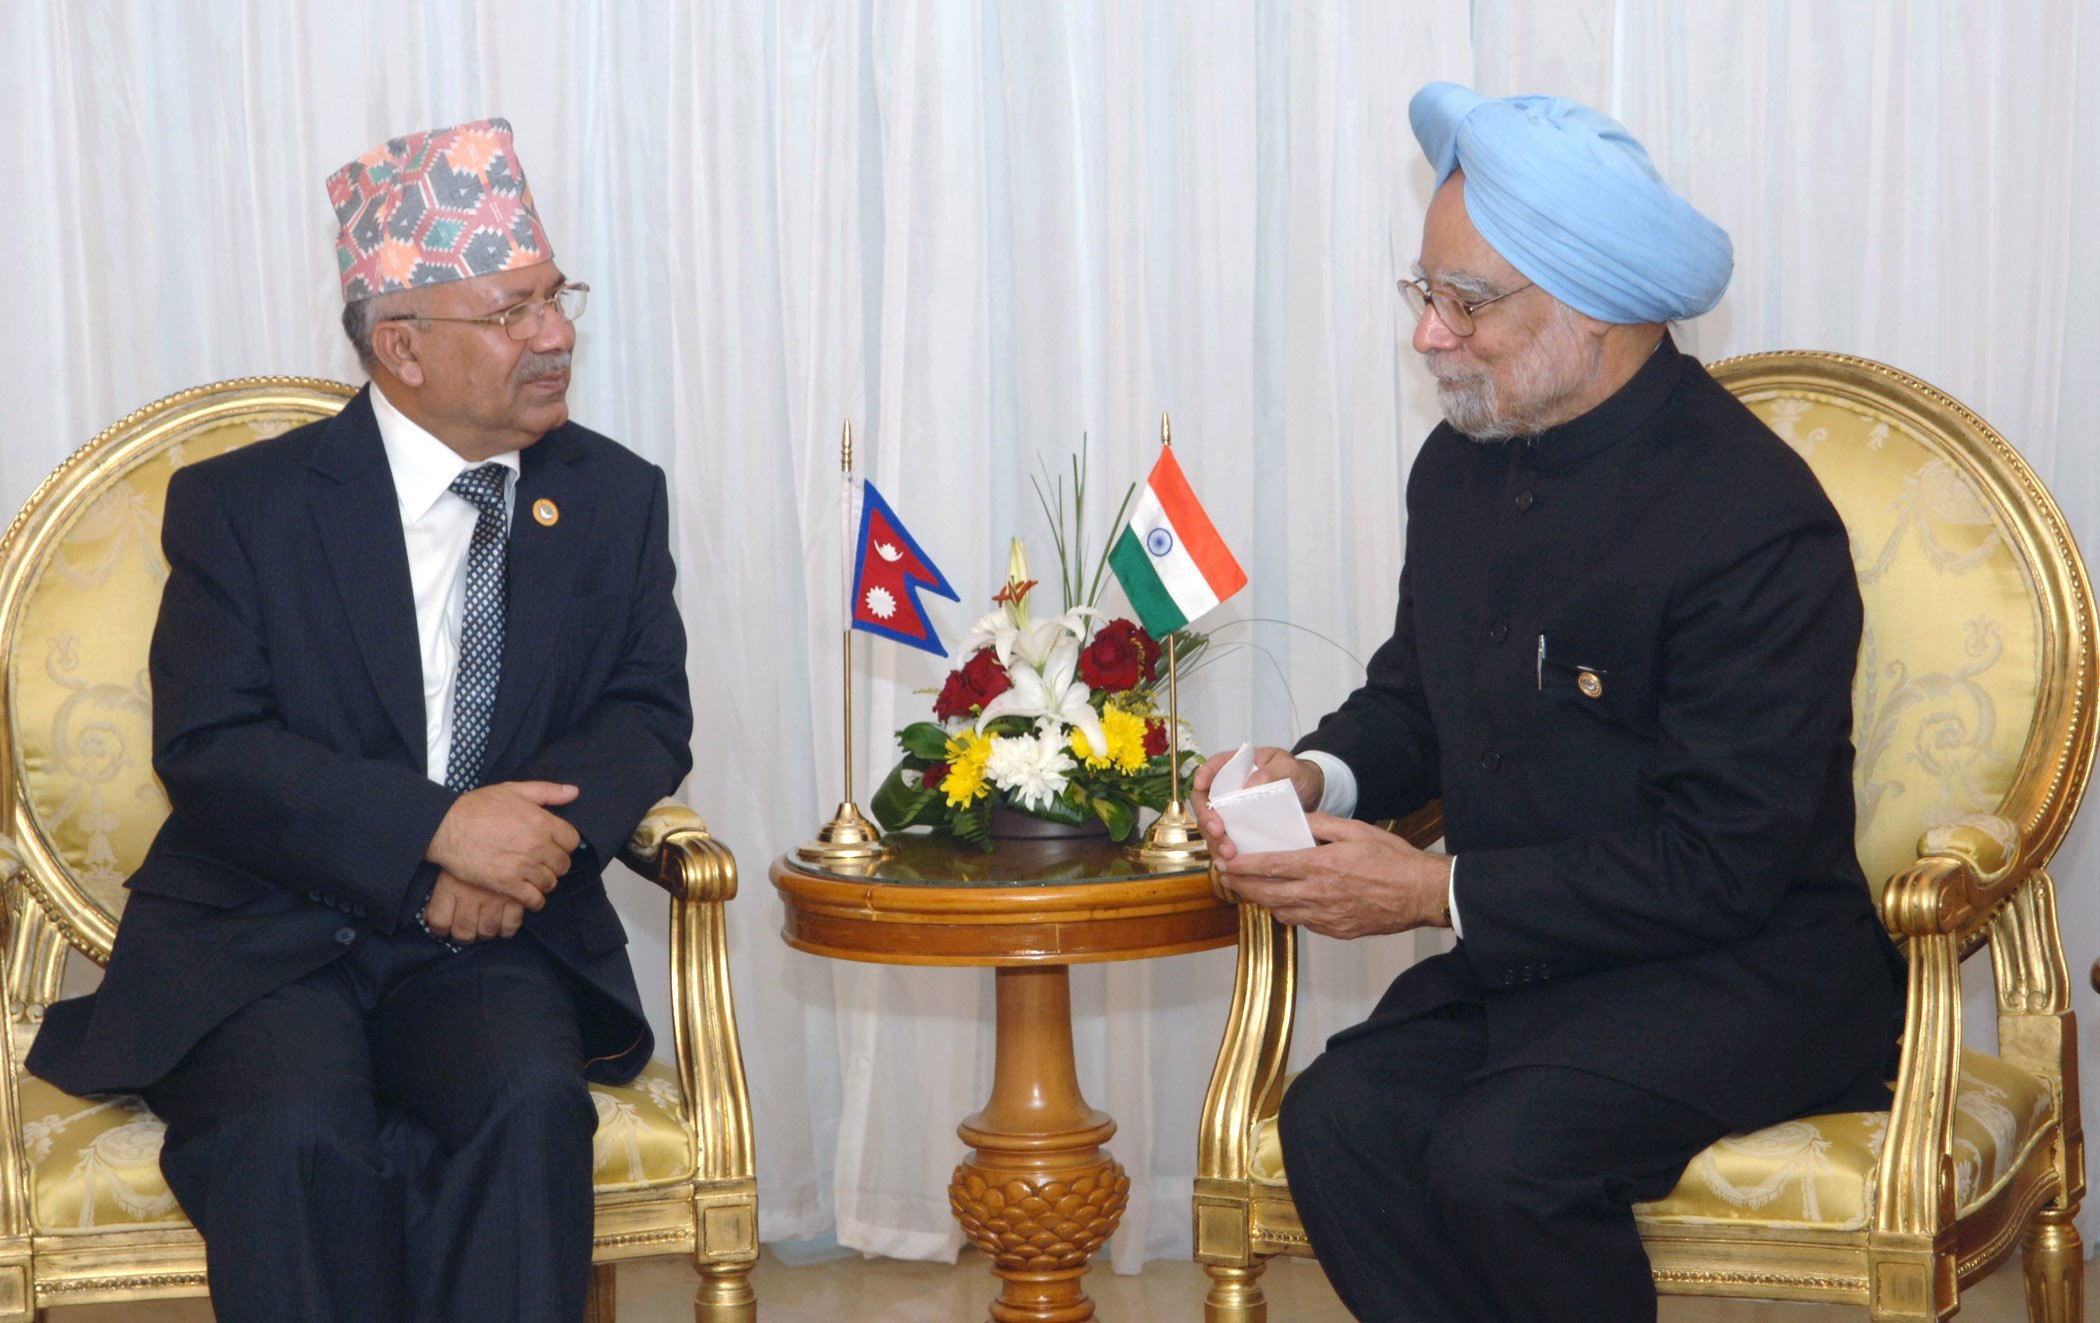 The_Prime_Minister,_Dr._Manmohan_Singh_meeting_the_Prime_Minister_of_Nepal,_Mr._Madhav_Kumar,_on_the_sidelines_of_the_15th_NAM_Summit,_at_Sharm_El_Sheikh,_Egypt,_on_July_16,_2009